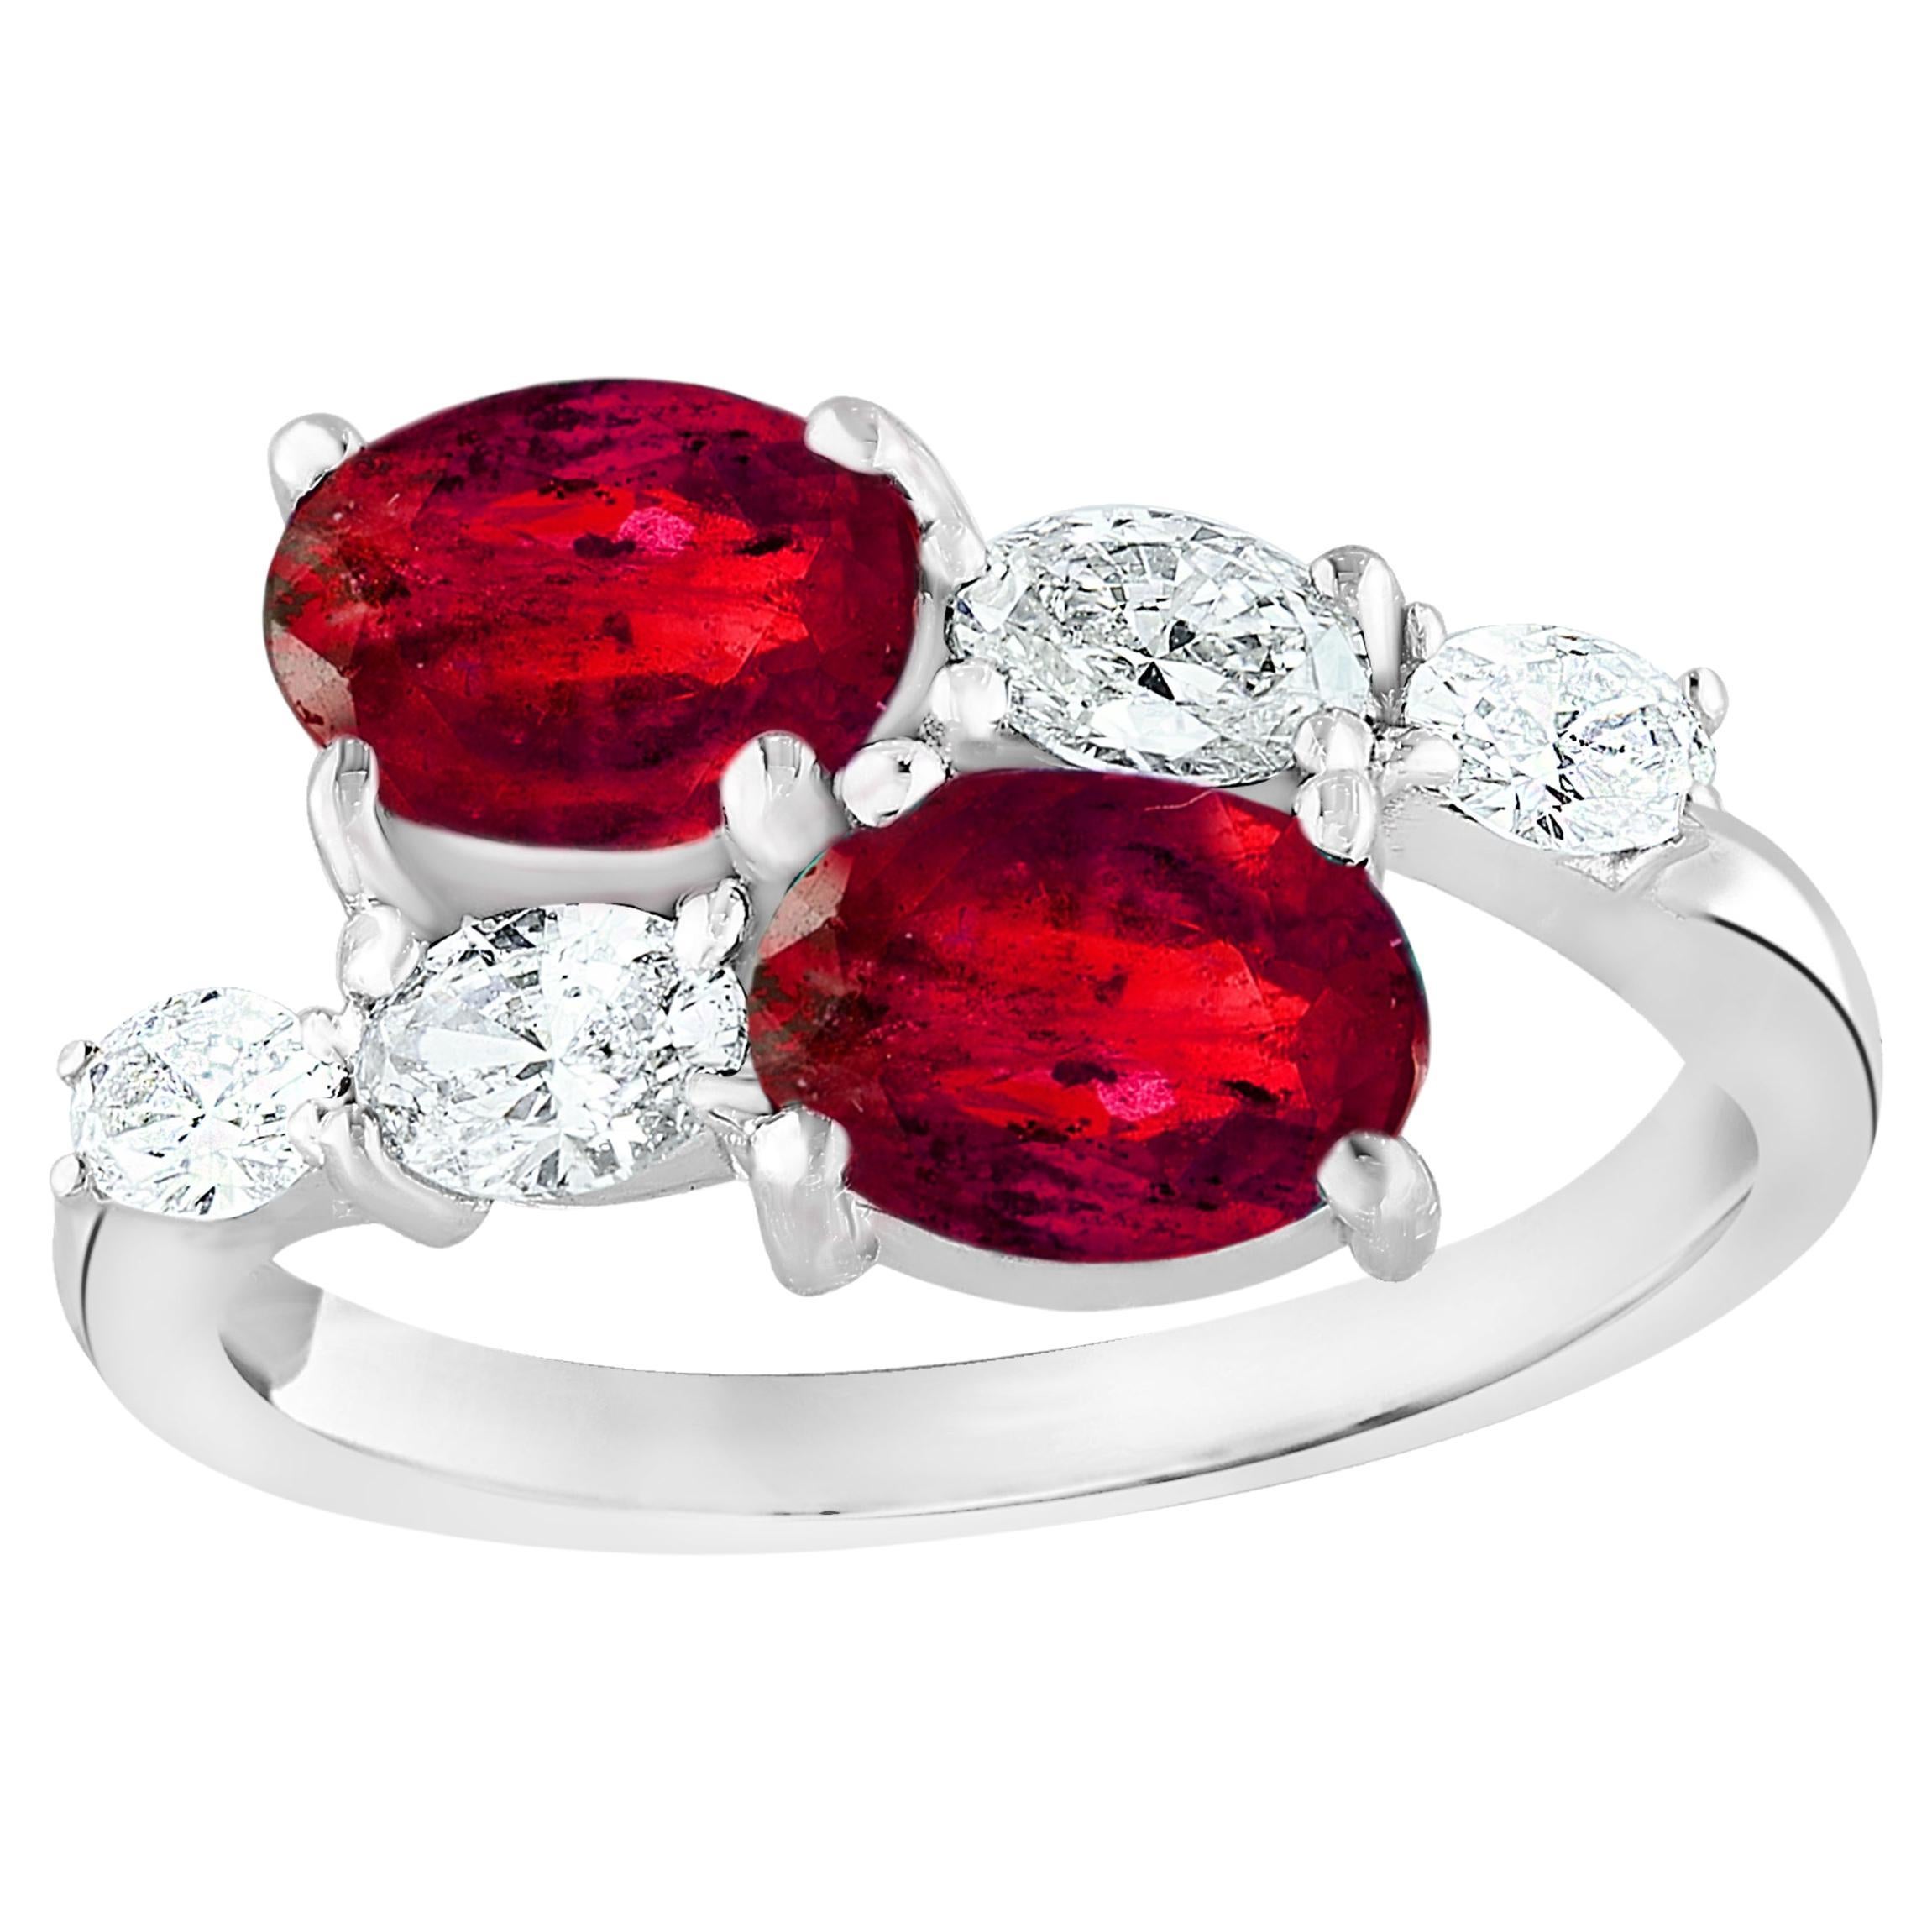 1.54 Carat Oval Cut Ruby Diamond Toi Et Moi Engagement Ring in 14K White Gold